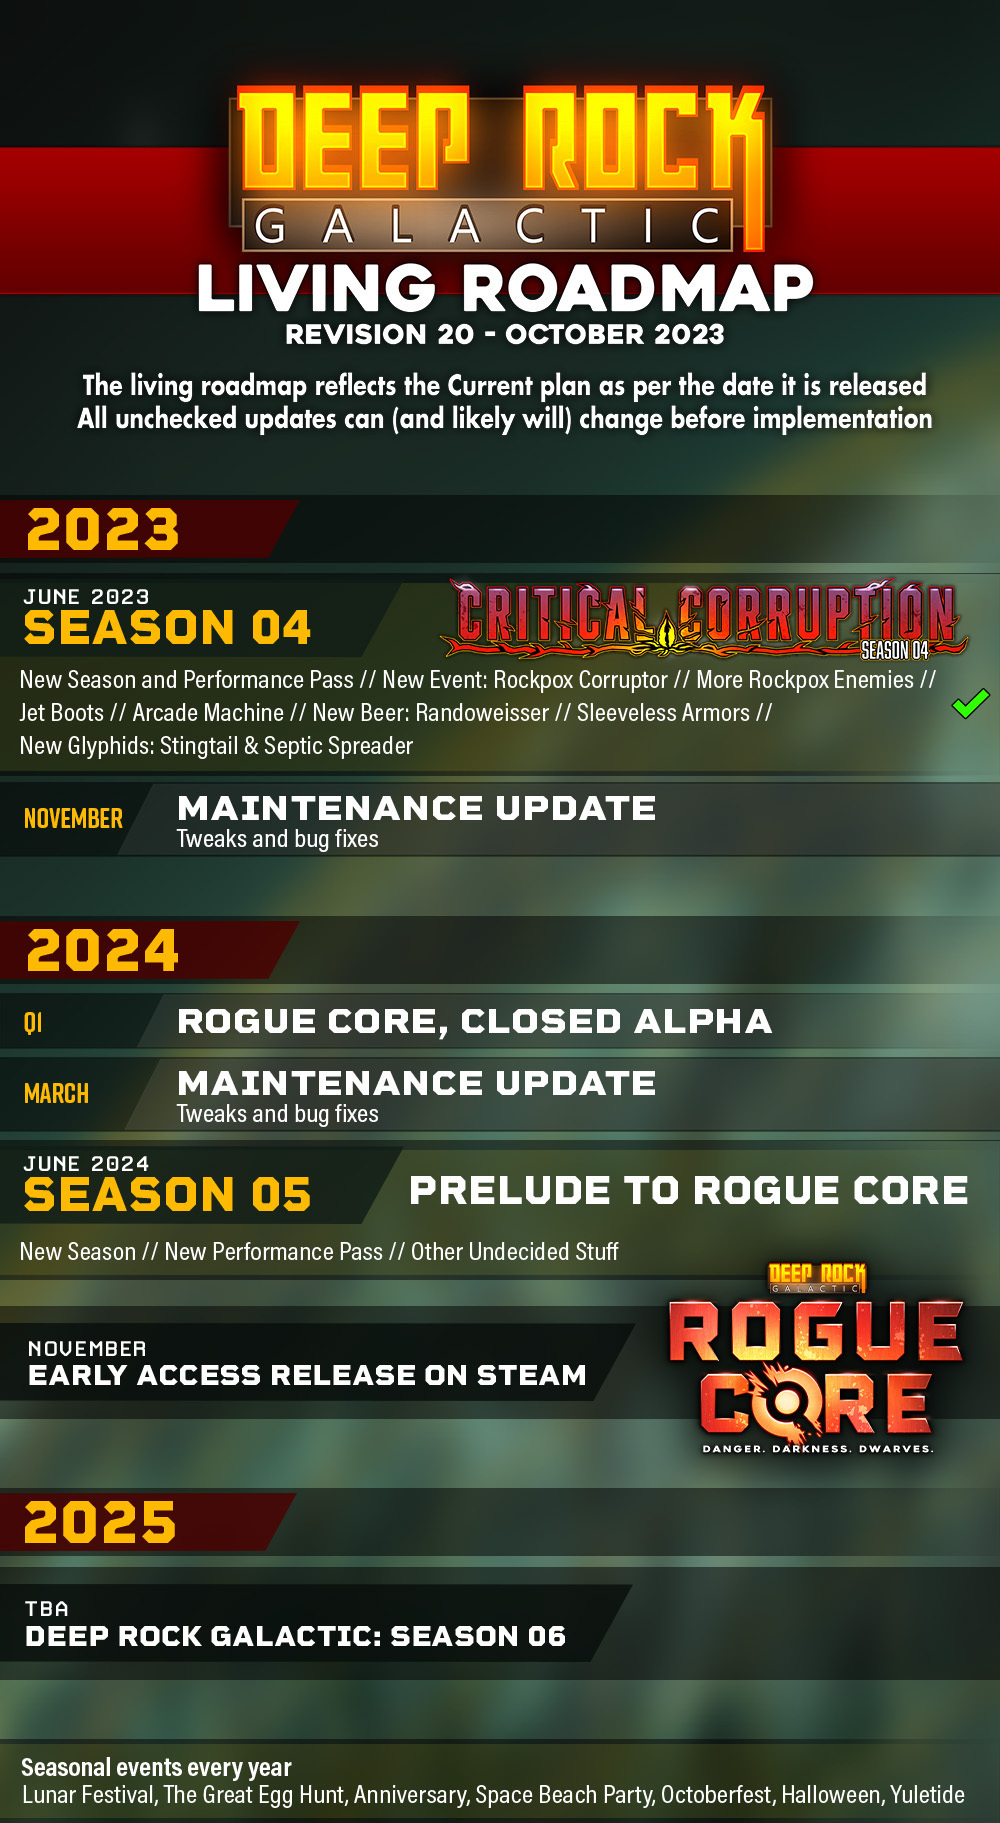 1st Early Access Roadmap Announced!